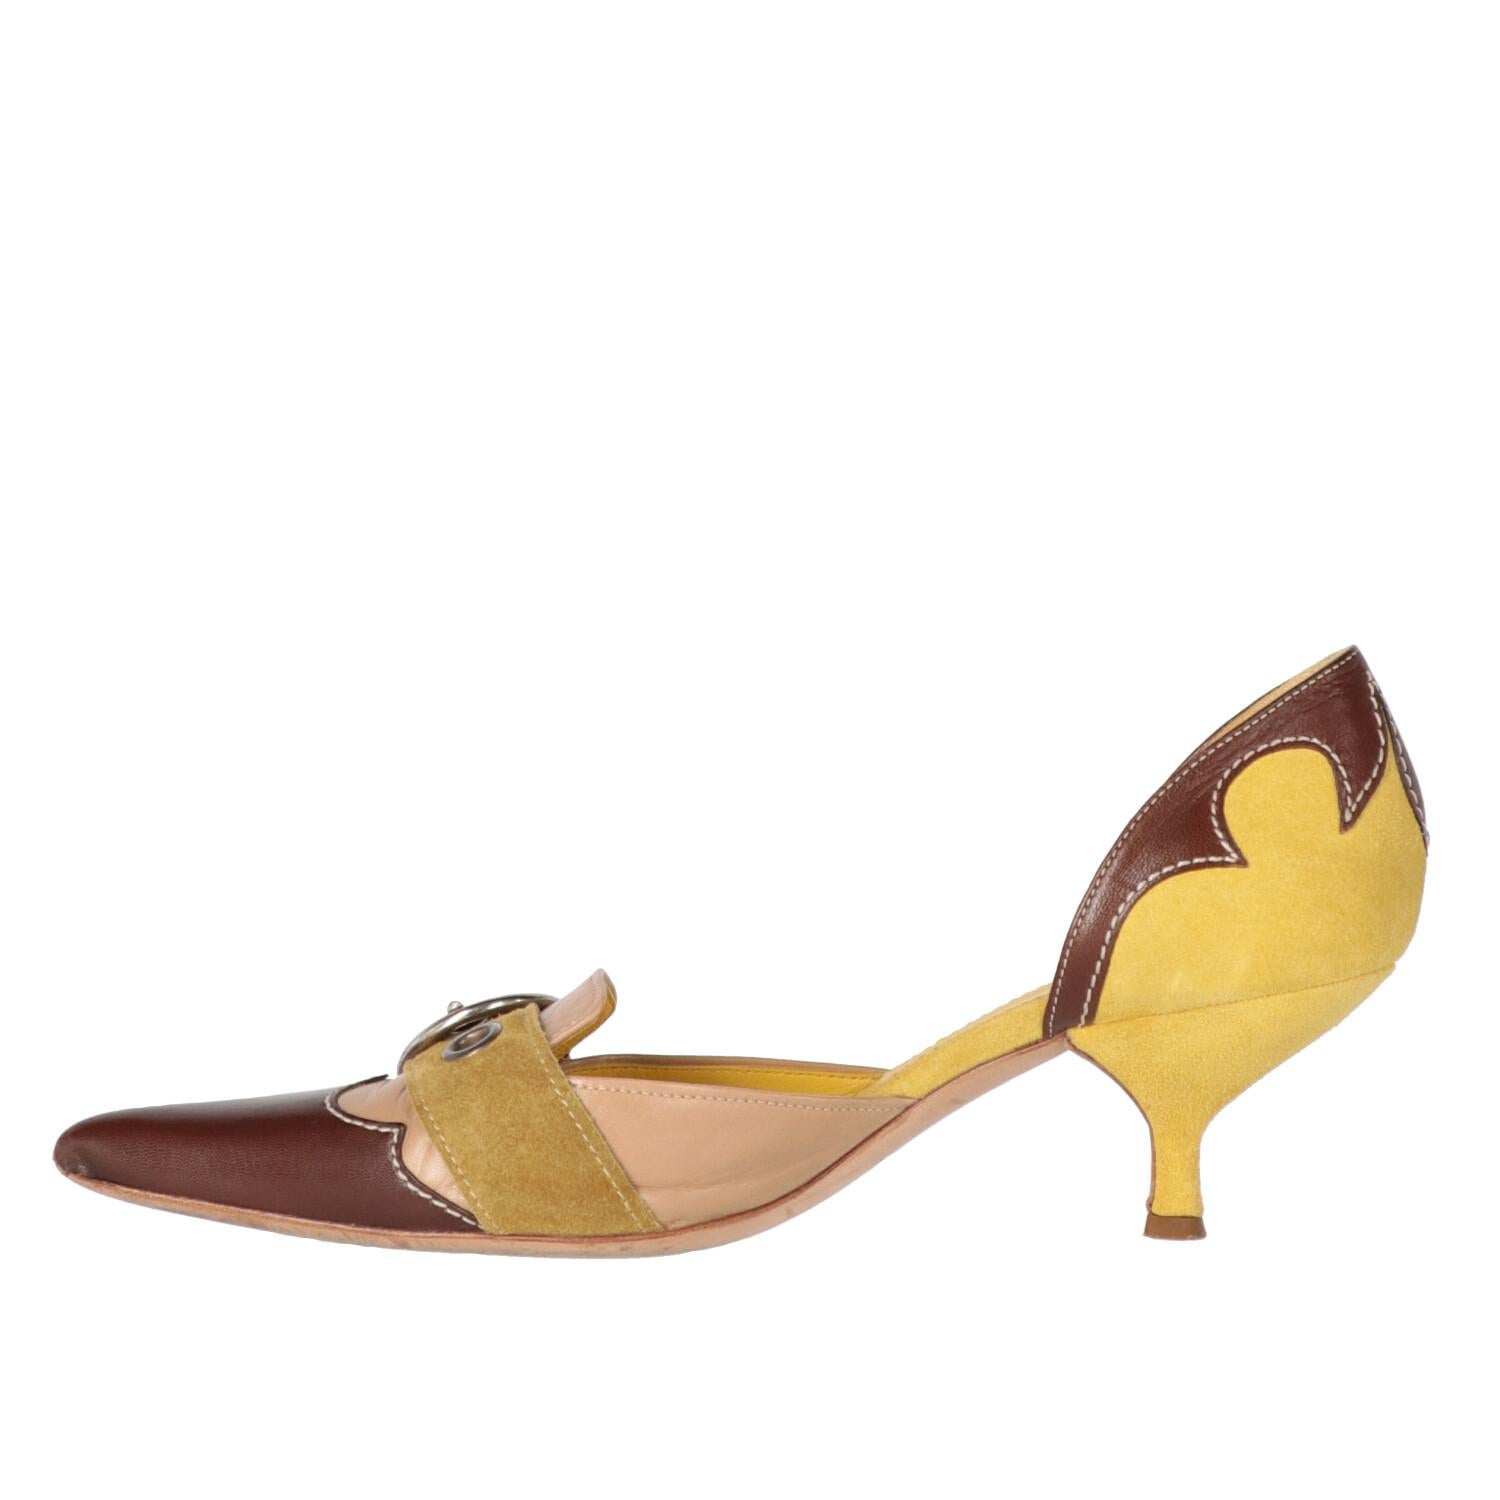 A.N.G.E.L.O. Vintage - ITALY

Prada leather and suede kitten heels pumps in shades of yellow, brown and beige. Pointed model and open at the sides, front buckle in silver metal and low heel.

The item shows a stain and signs of wear, as shows in the